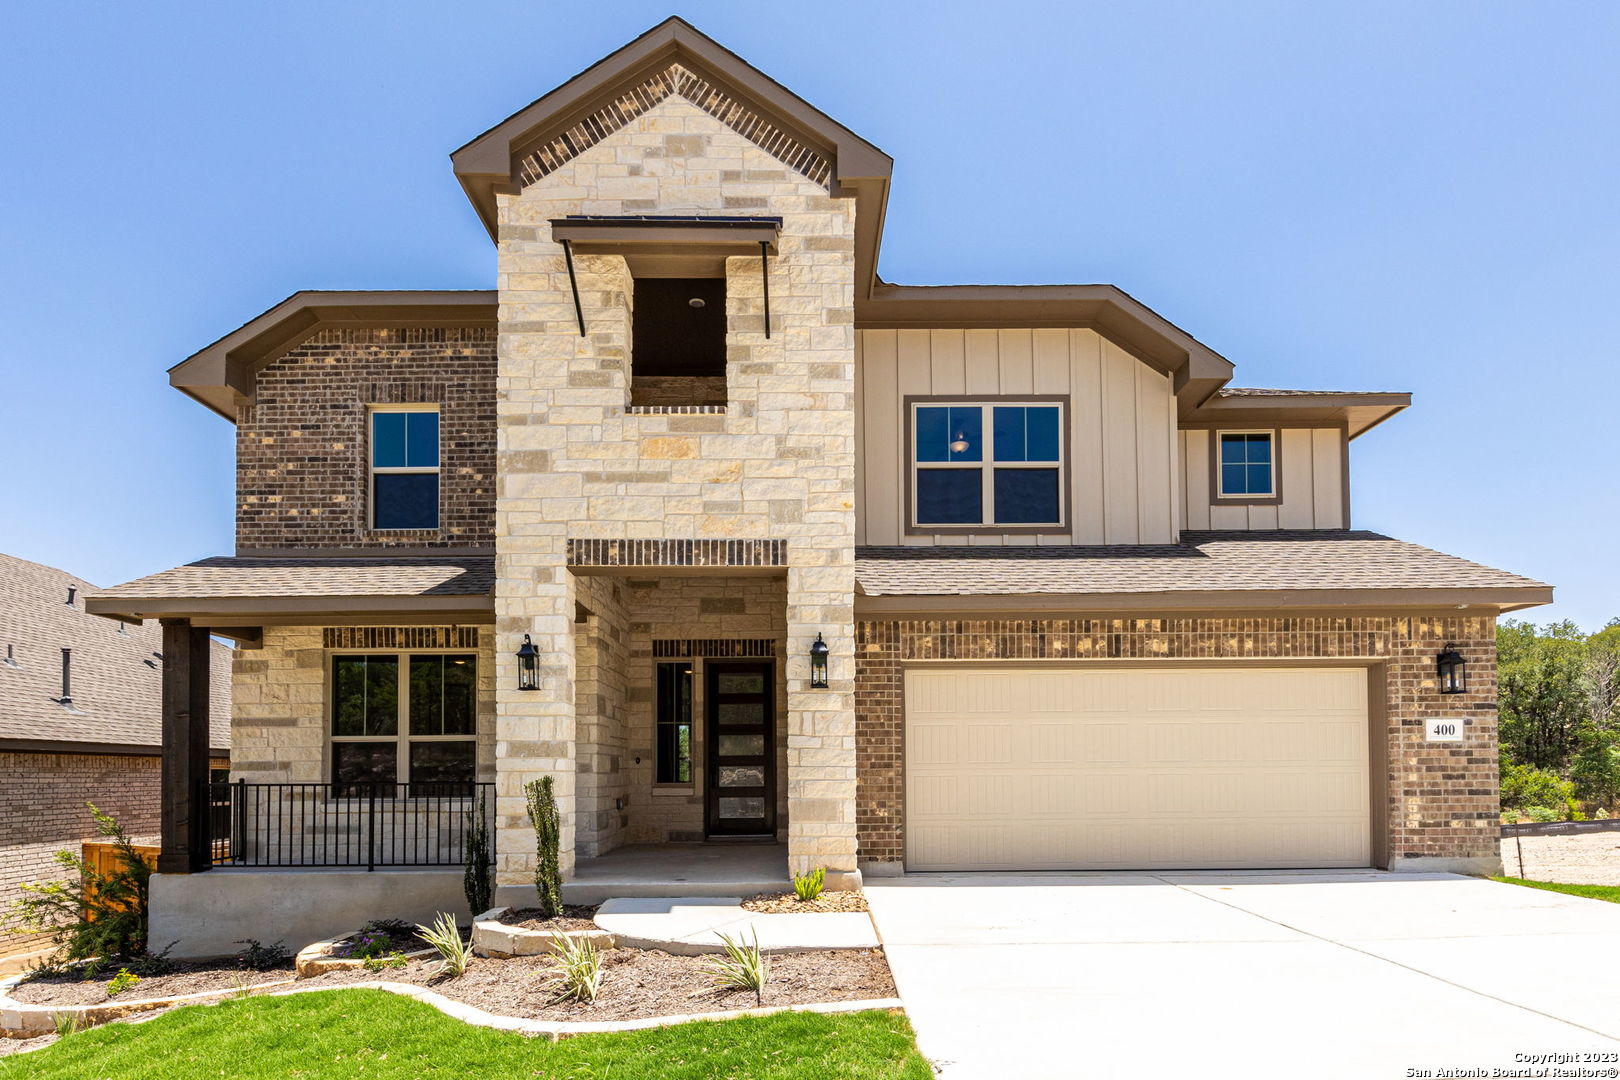 Photo of 400 Seibel Wy in Universal City, TX